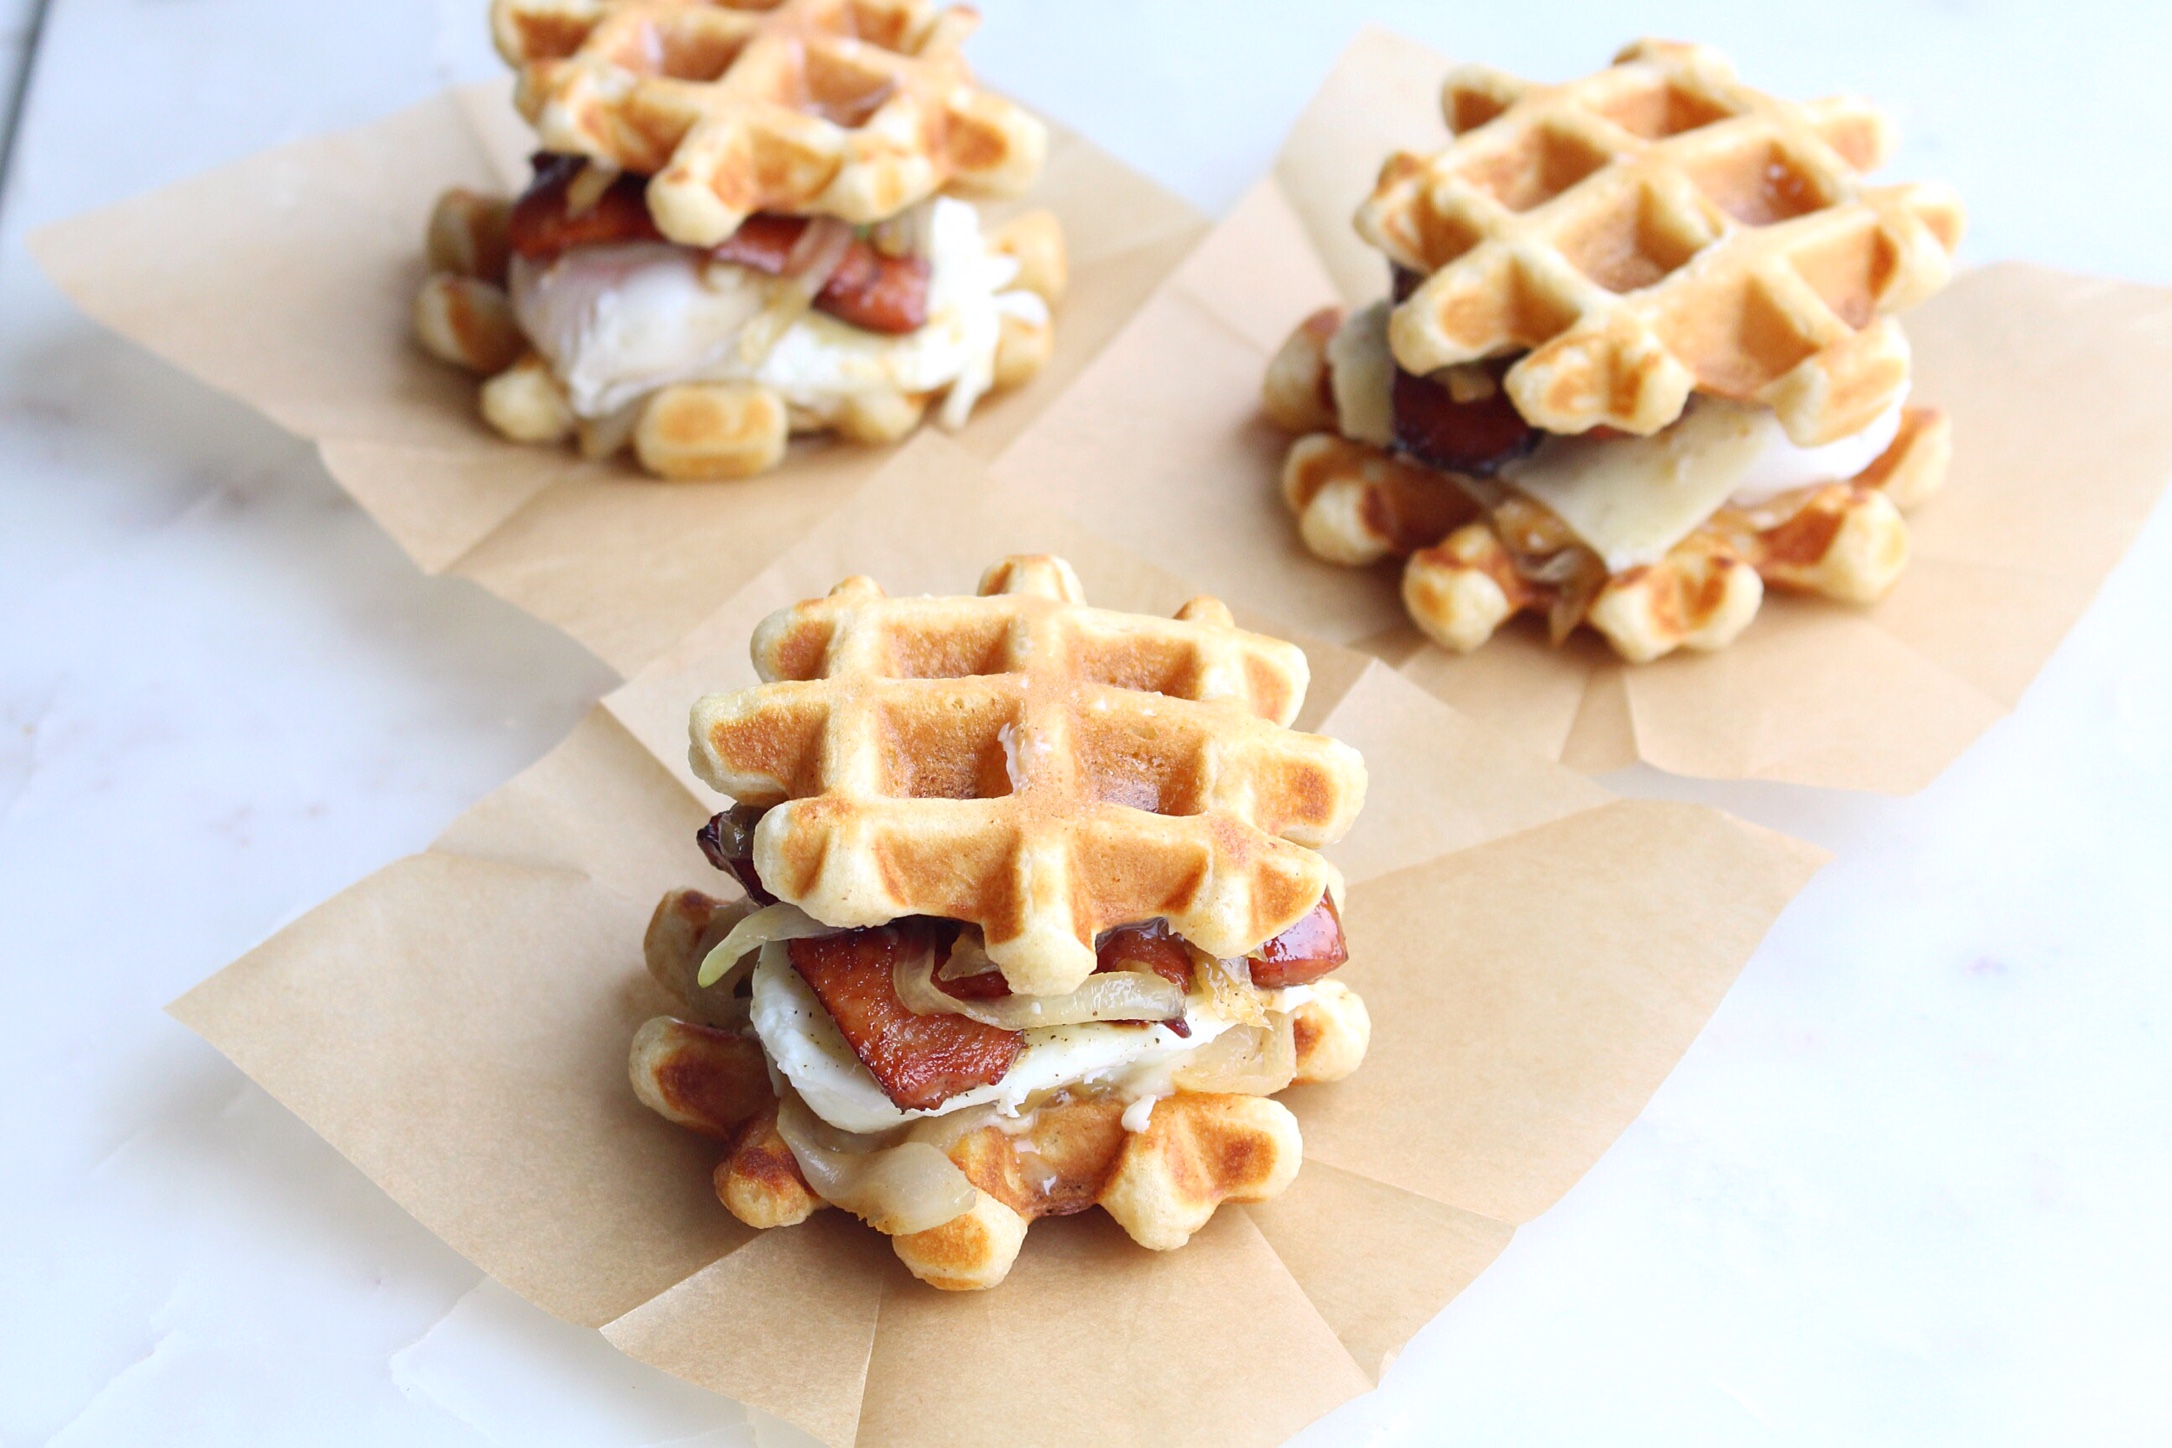 Mini Waffle Breakfast Sandwiches - The Sweet and Simple Kitchen